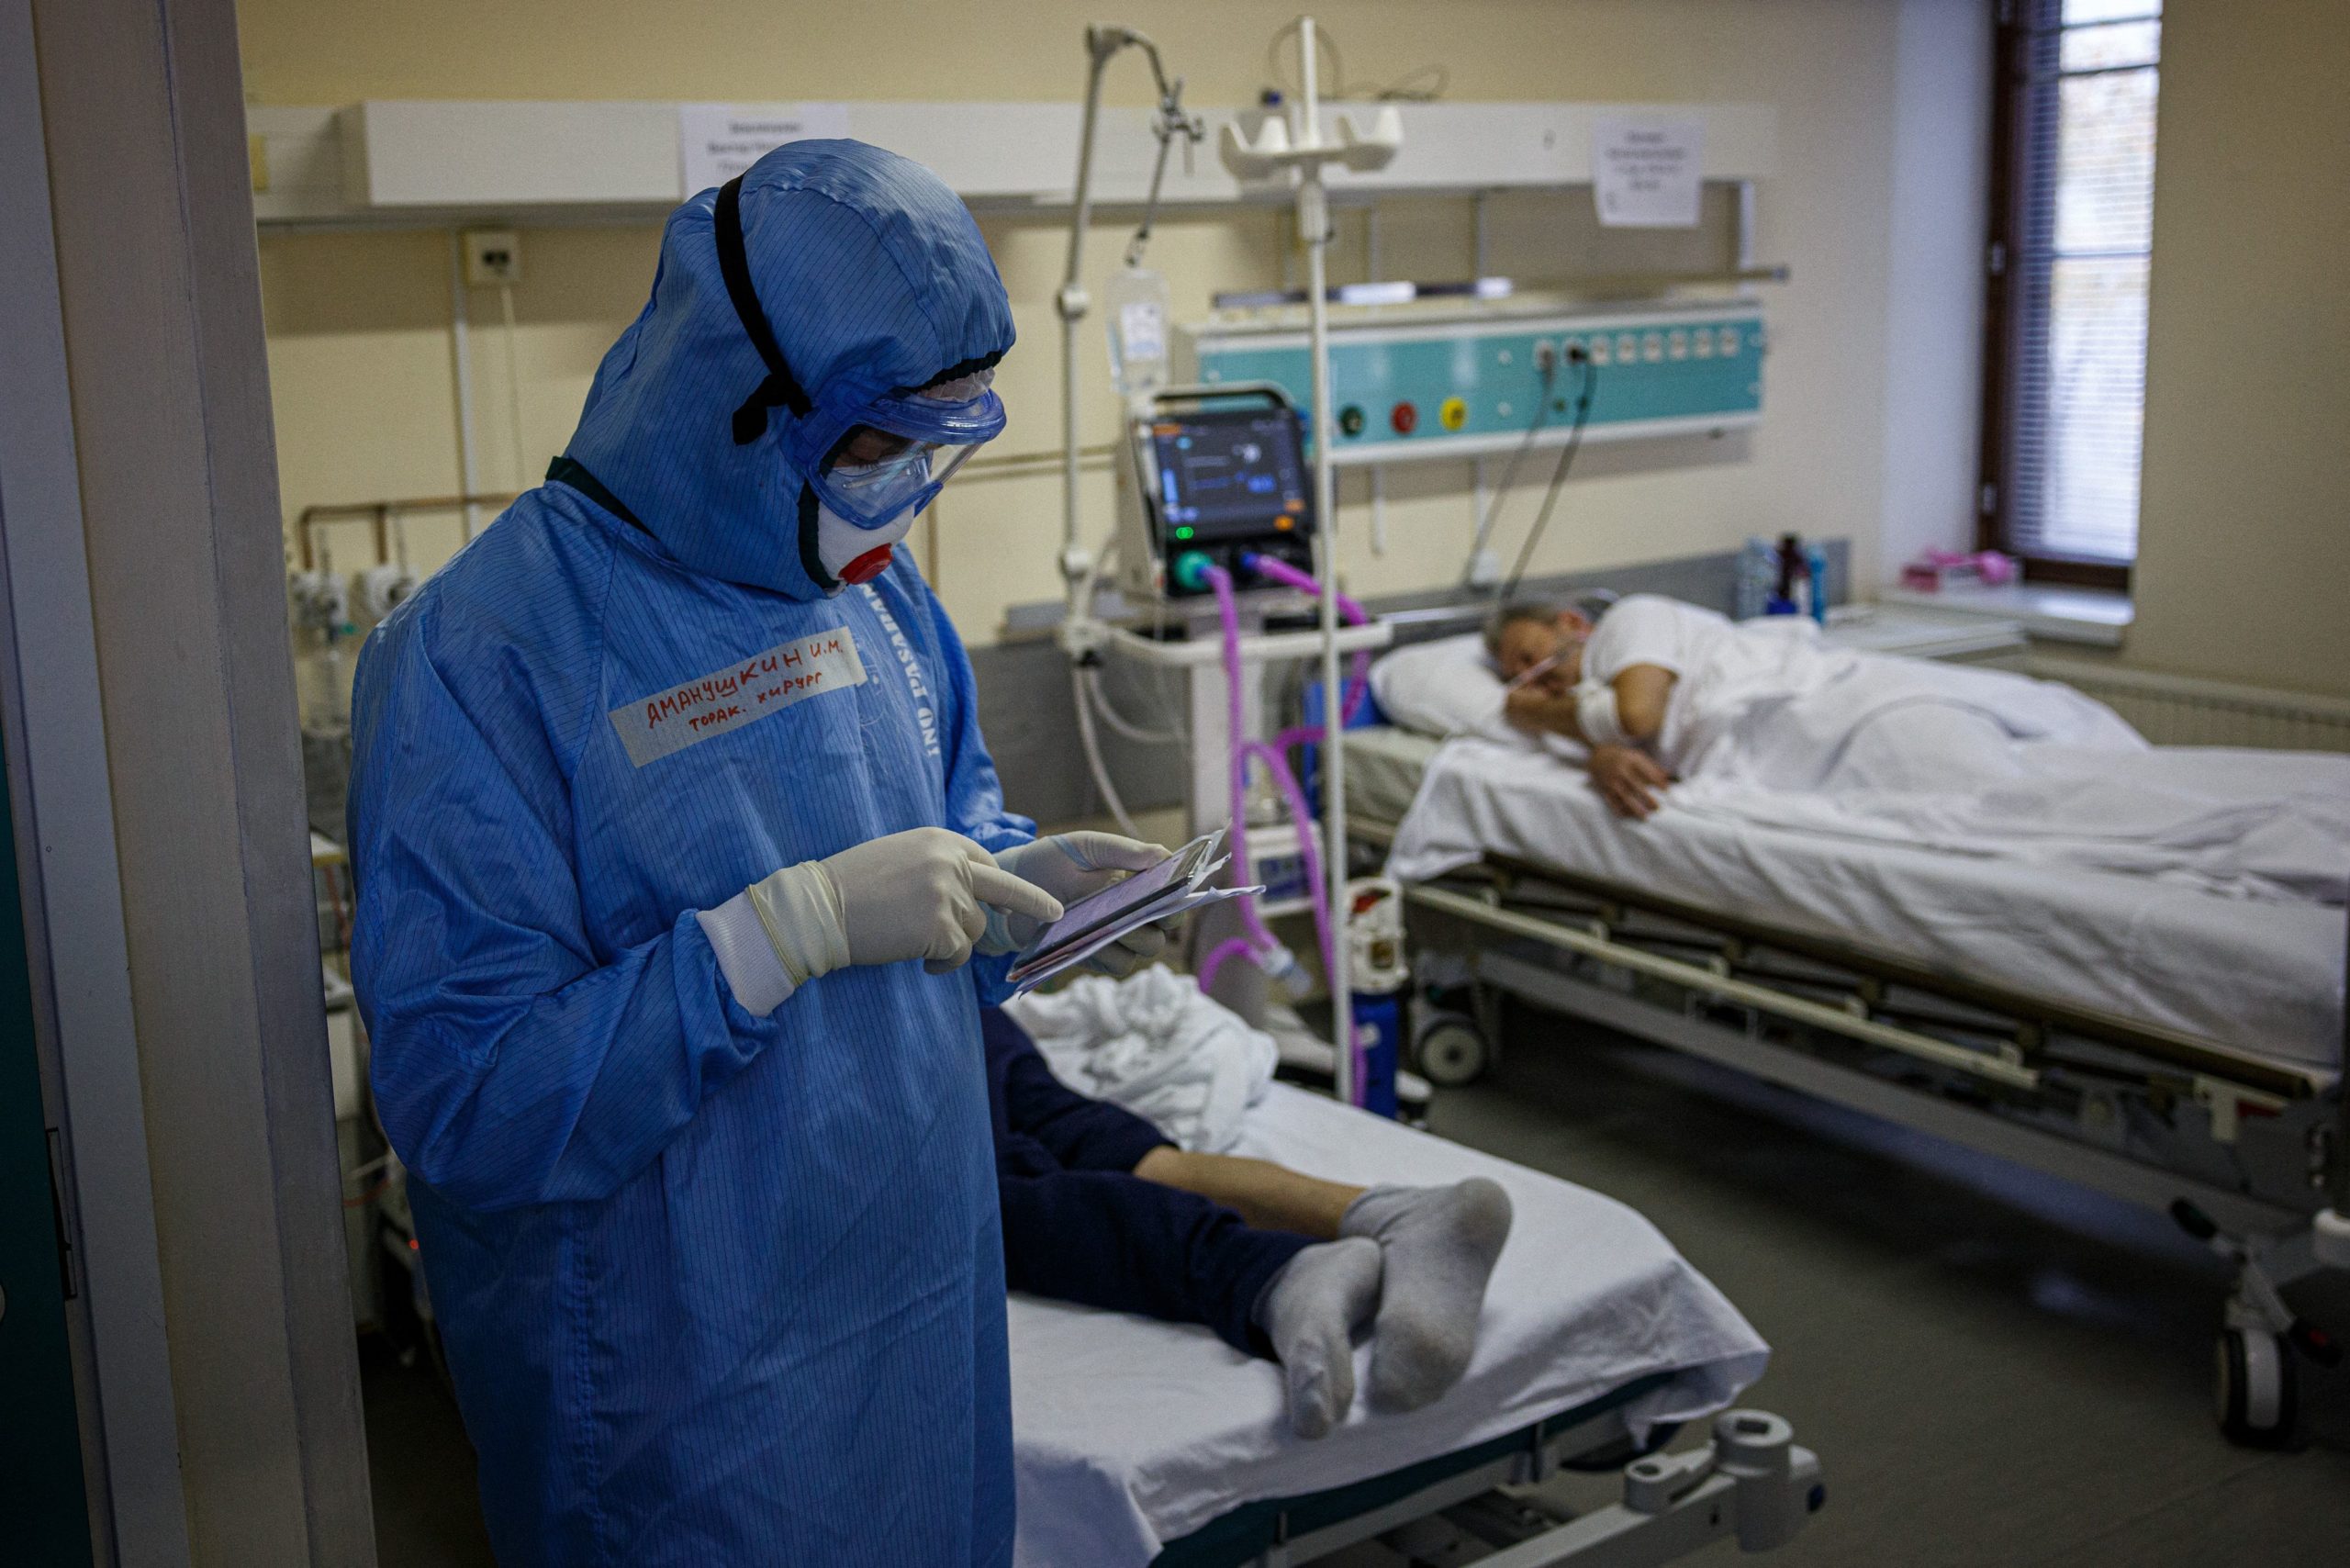 A medic wearing personal protective equipment (PPE) works in the intensive care unit for Covid-19 coronavirus patients in the Moscow Sklifosovsky emergency hospital in Moscow on October 20, 2021. - Russia said on October 20, 1,028 people died of Covid over the past 24 hours, a new record, as President Vladimir Putin mulls introducing nationwide restrictions to curb the spread of the disease. (Photo by Dimitar DILKOFF / AFP) (Photo by DIMITAR DILKOFF/AFP via Getty Images)